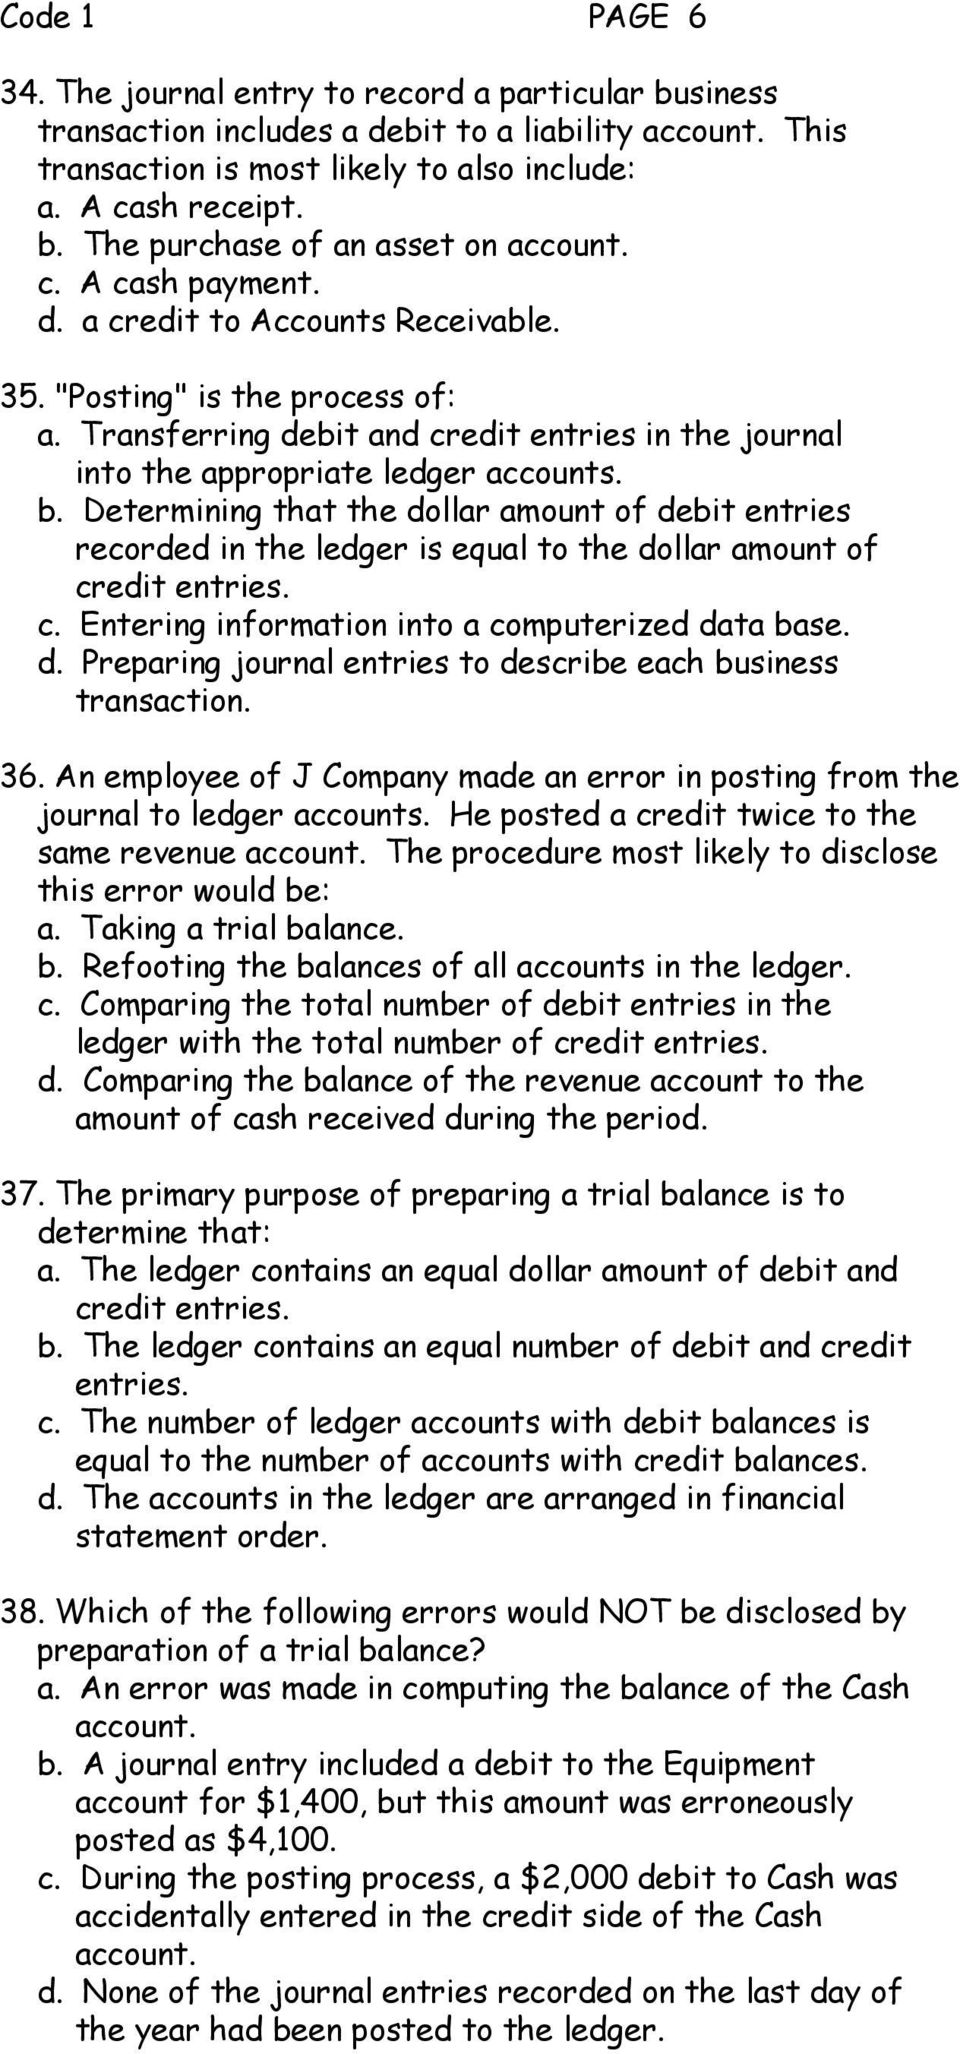 Determining that the dollar amount of debit entries recorded in the ledger is equal to the dollar amount of credit entries. c. Entering information into a computerized data base. d. Preparing journal entries to describe each business transaction.